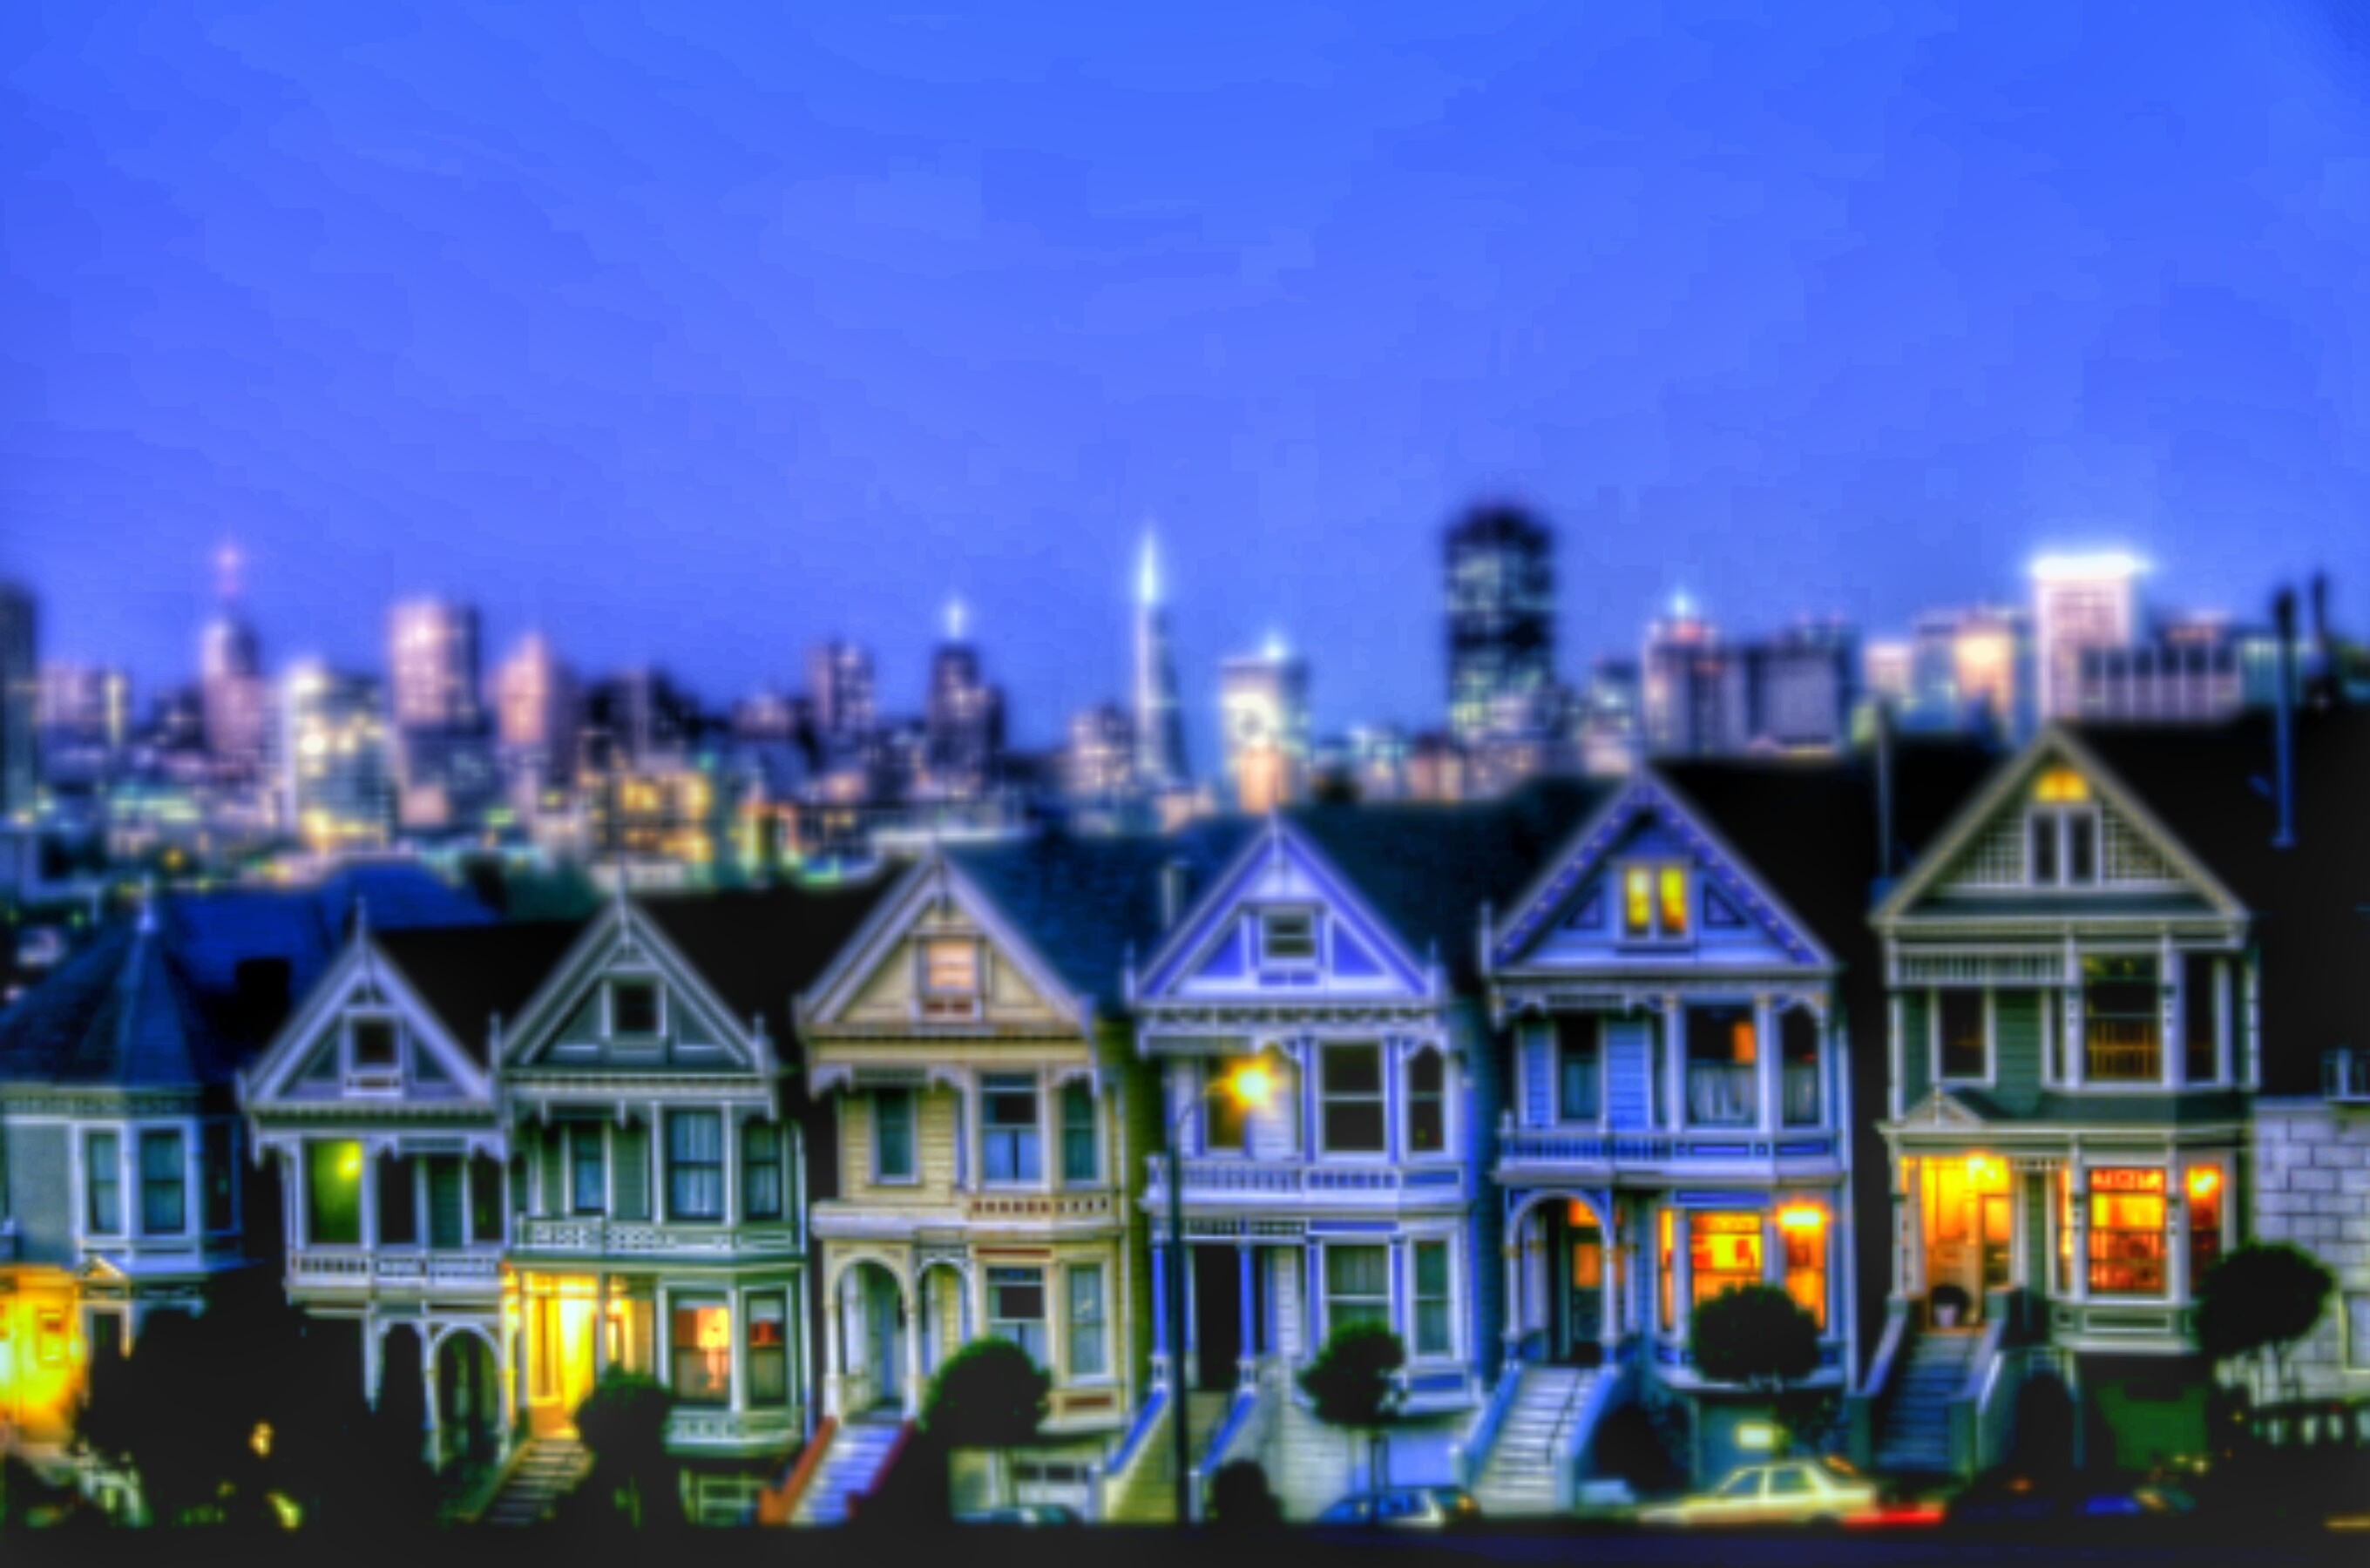 Painted Ladies Houses By Illuminated Urban Skyline Against Sky At Night